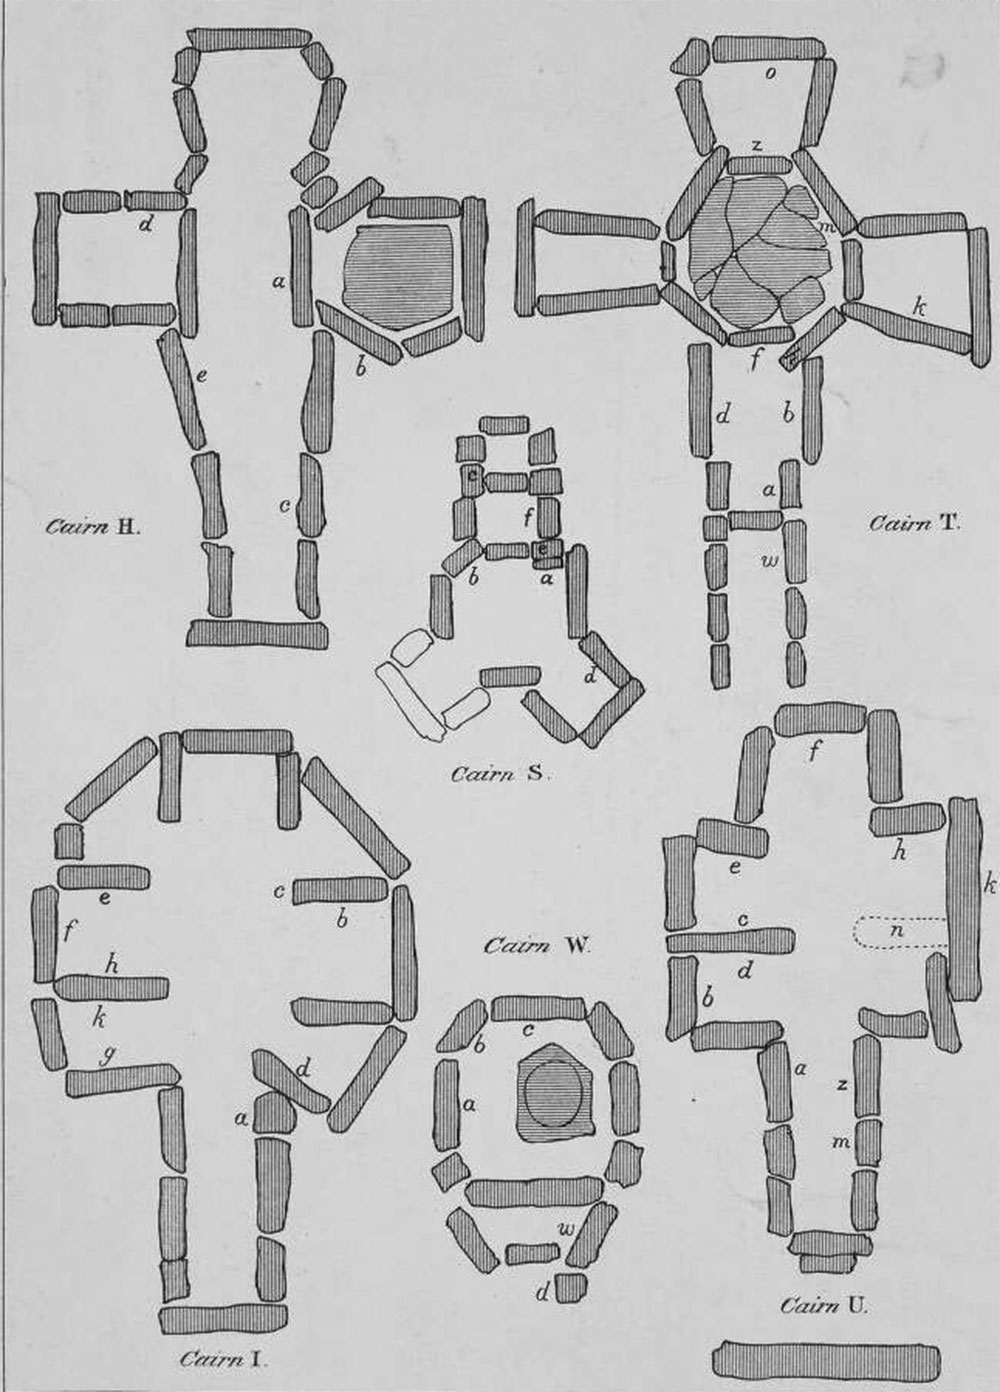 Plans of the chambers of some of the Loughcrew cairns by Eugene A. Conwell.